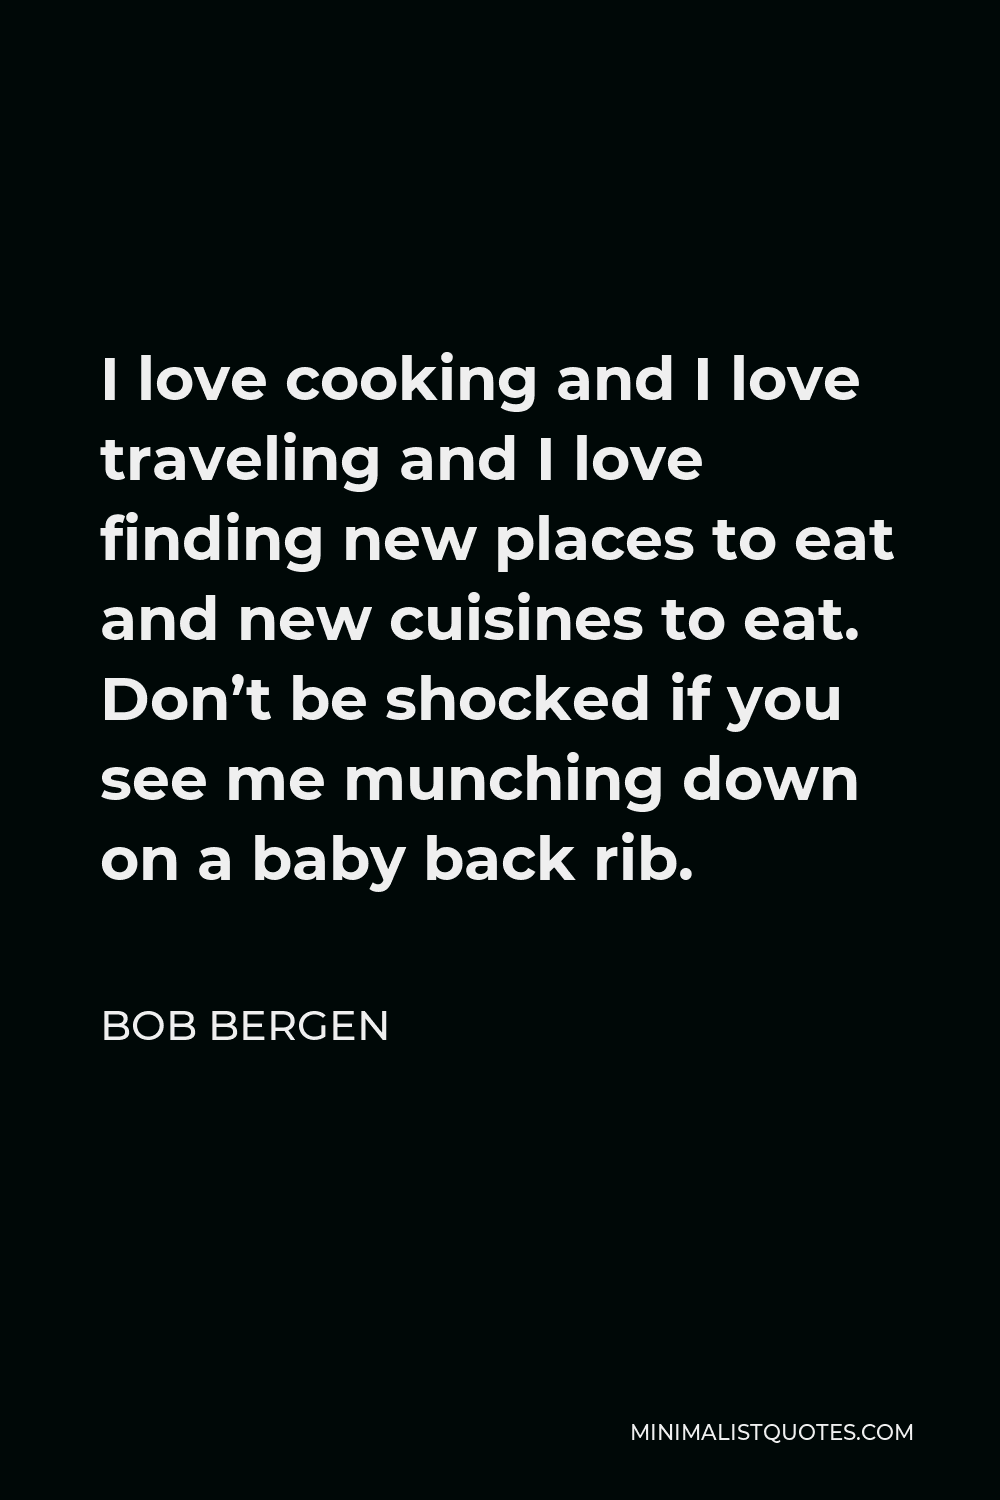 Bob Bergen Quote - I love cooking and I love traveling and I love finding new places to eat and new cuisines to eat. Don’t be shocked if you see me munching down on a baby back rib.